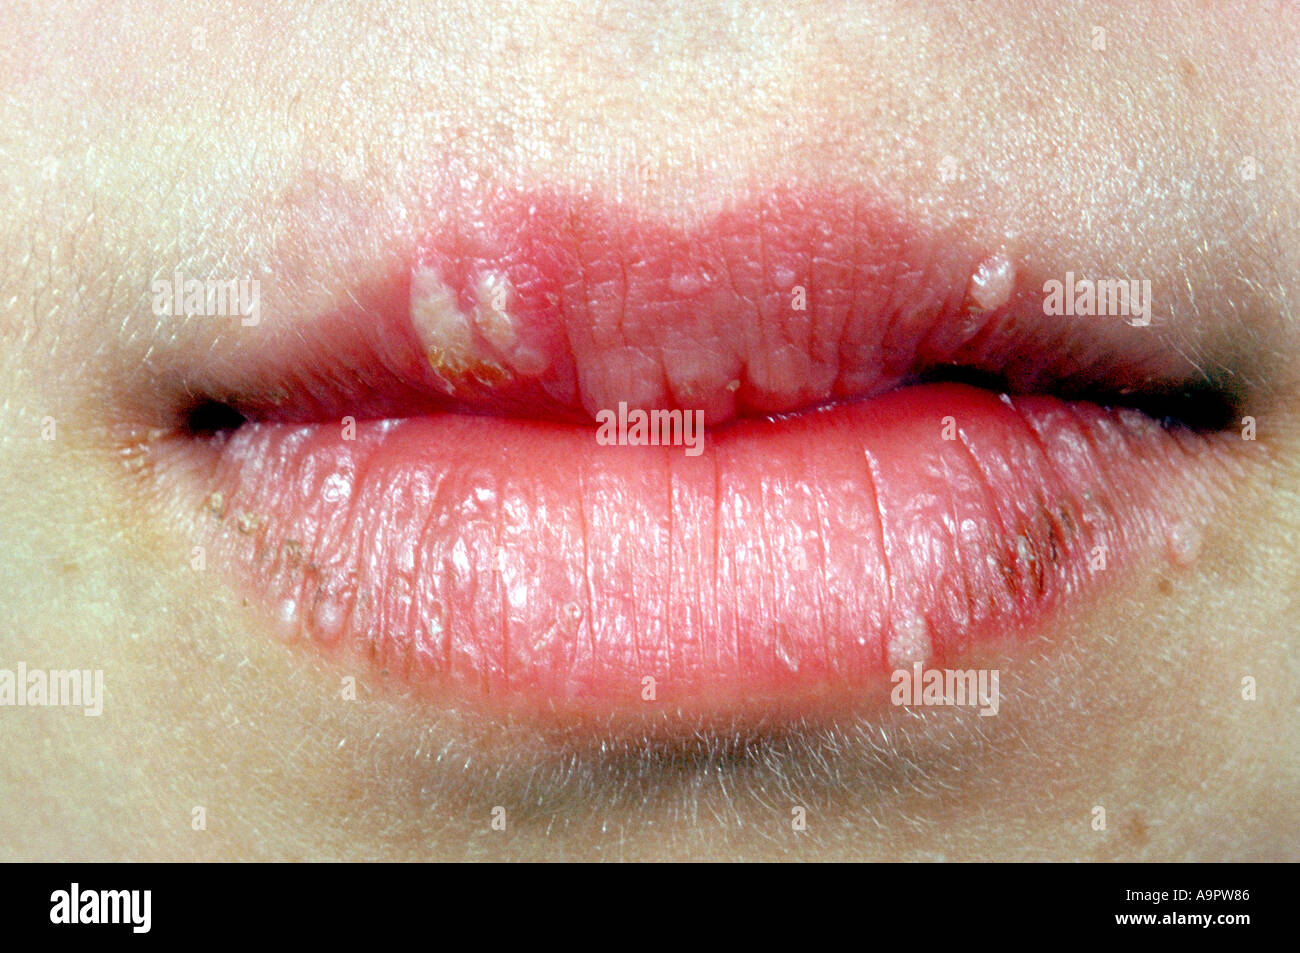 Herpes simplex cold sores on lips Stock Photo